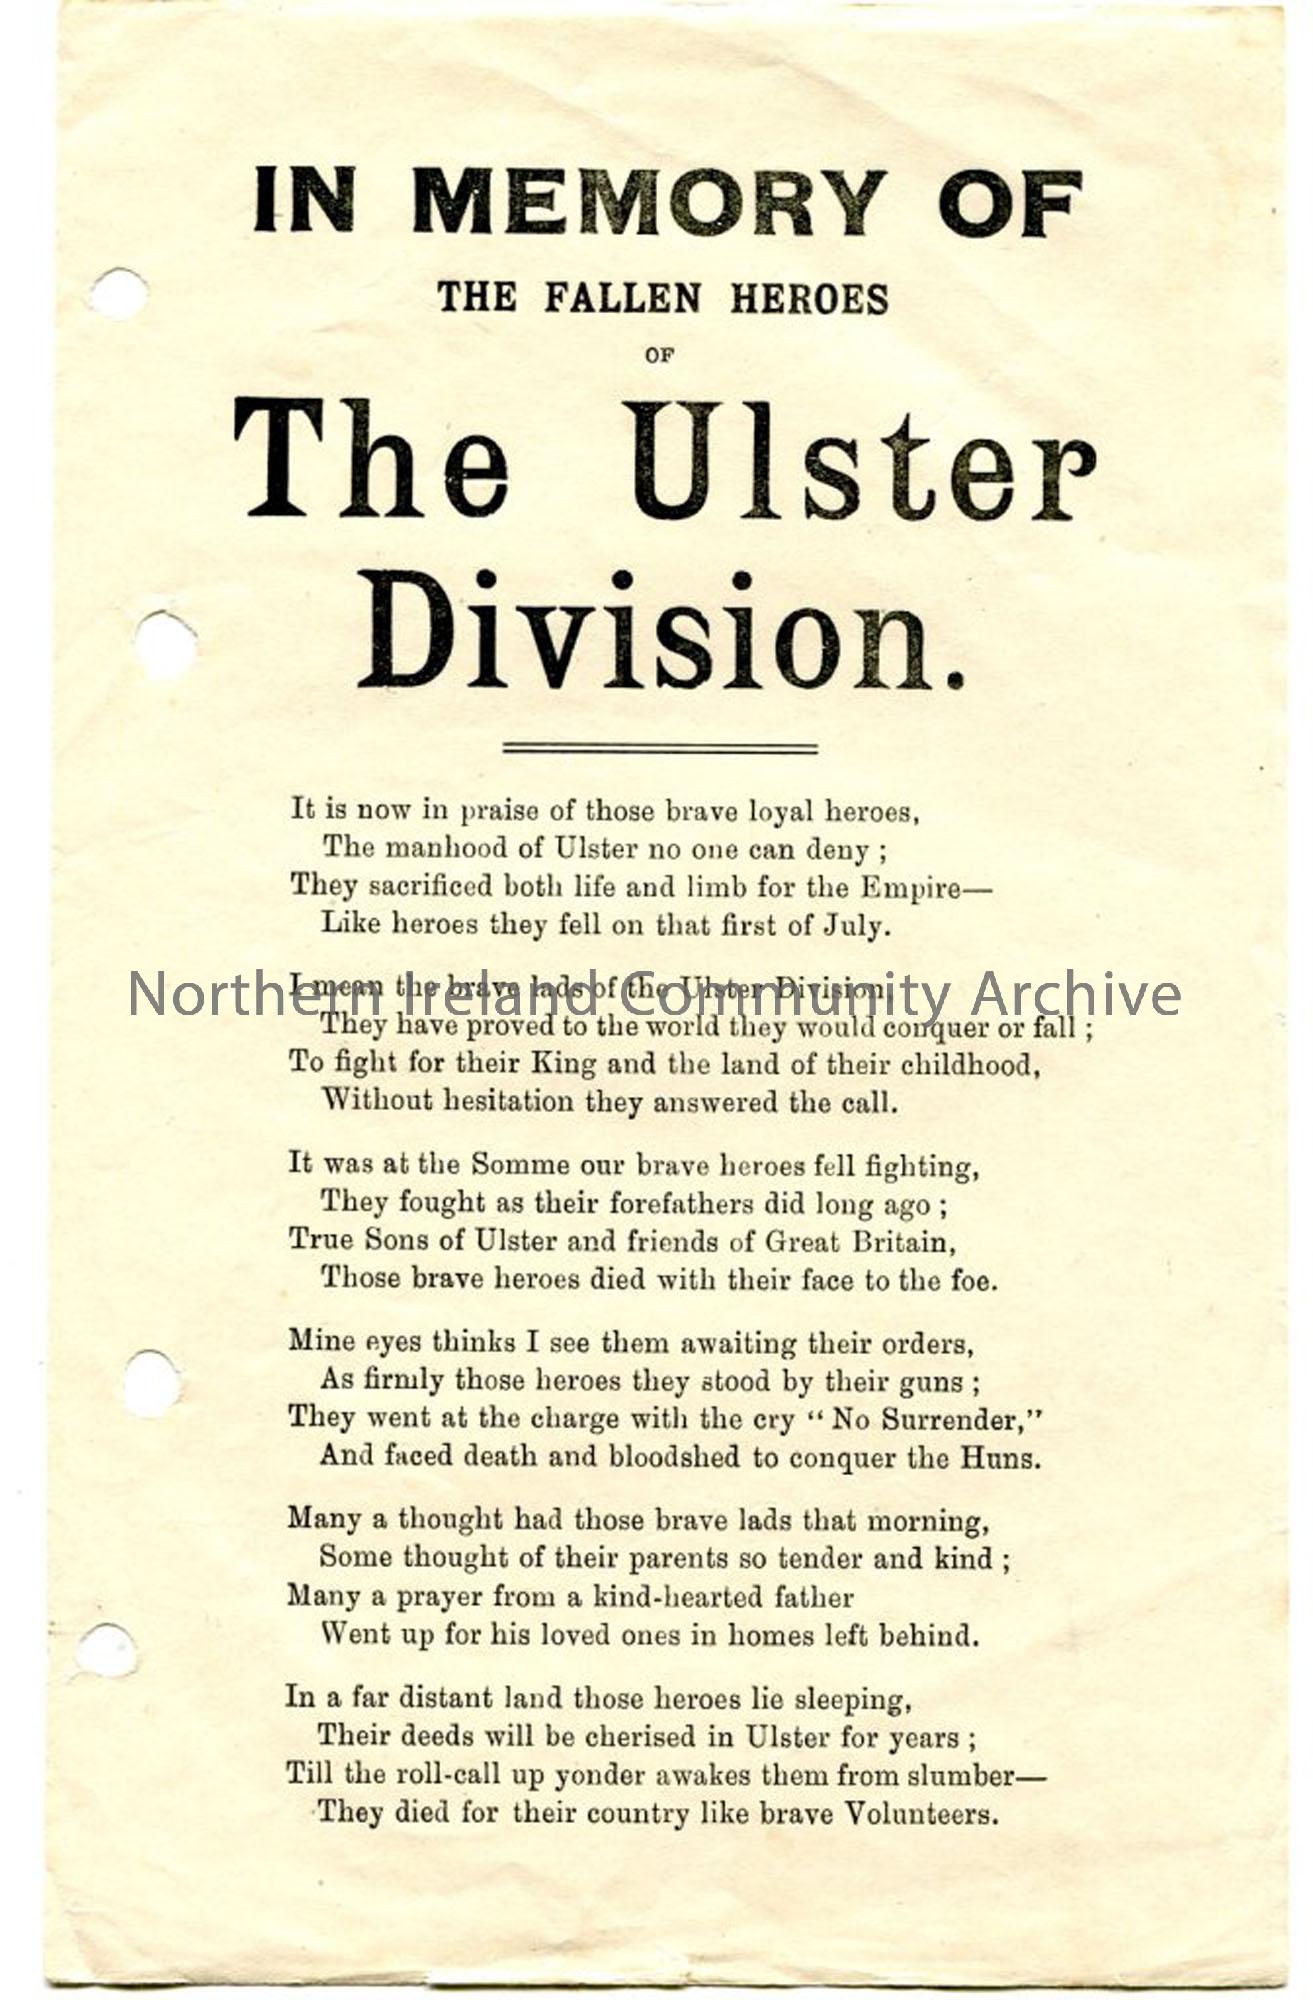 ‘In Memory of the Fallen Heroes of The Ulster Division’